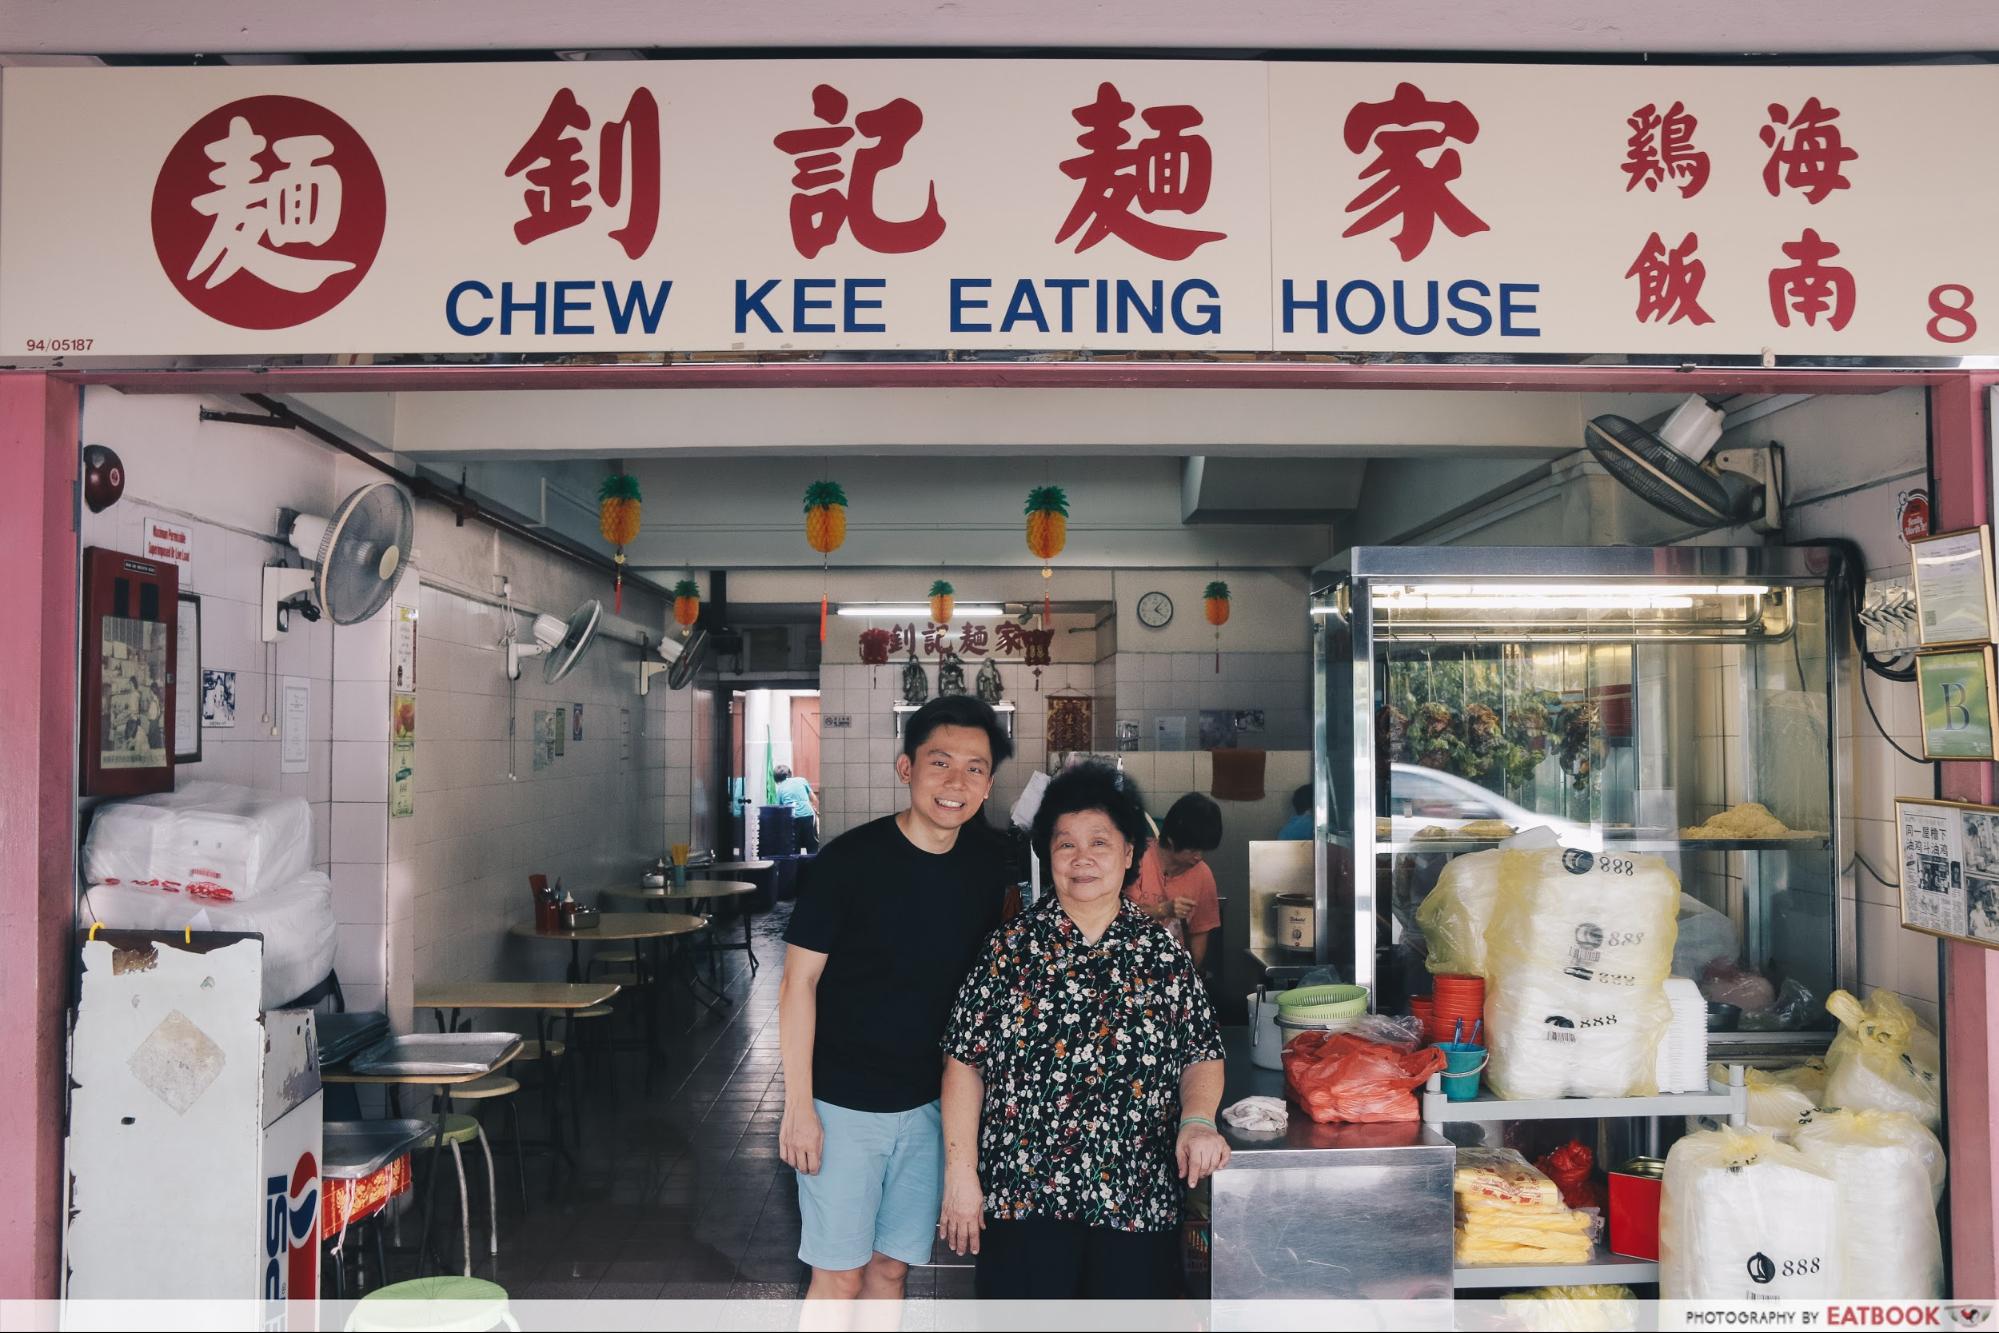 Battle of Chew Kee and Chiew Kee - Chew Kee storefront